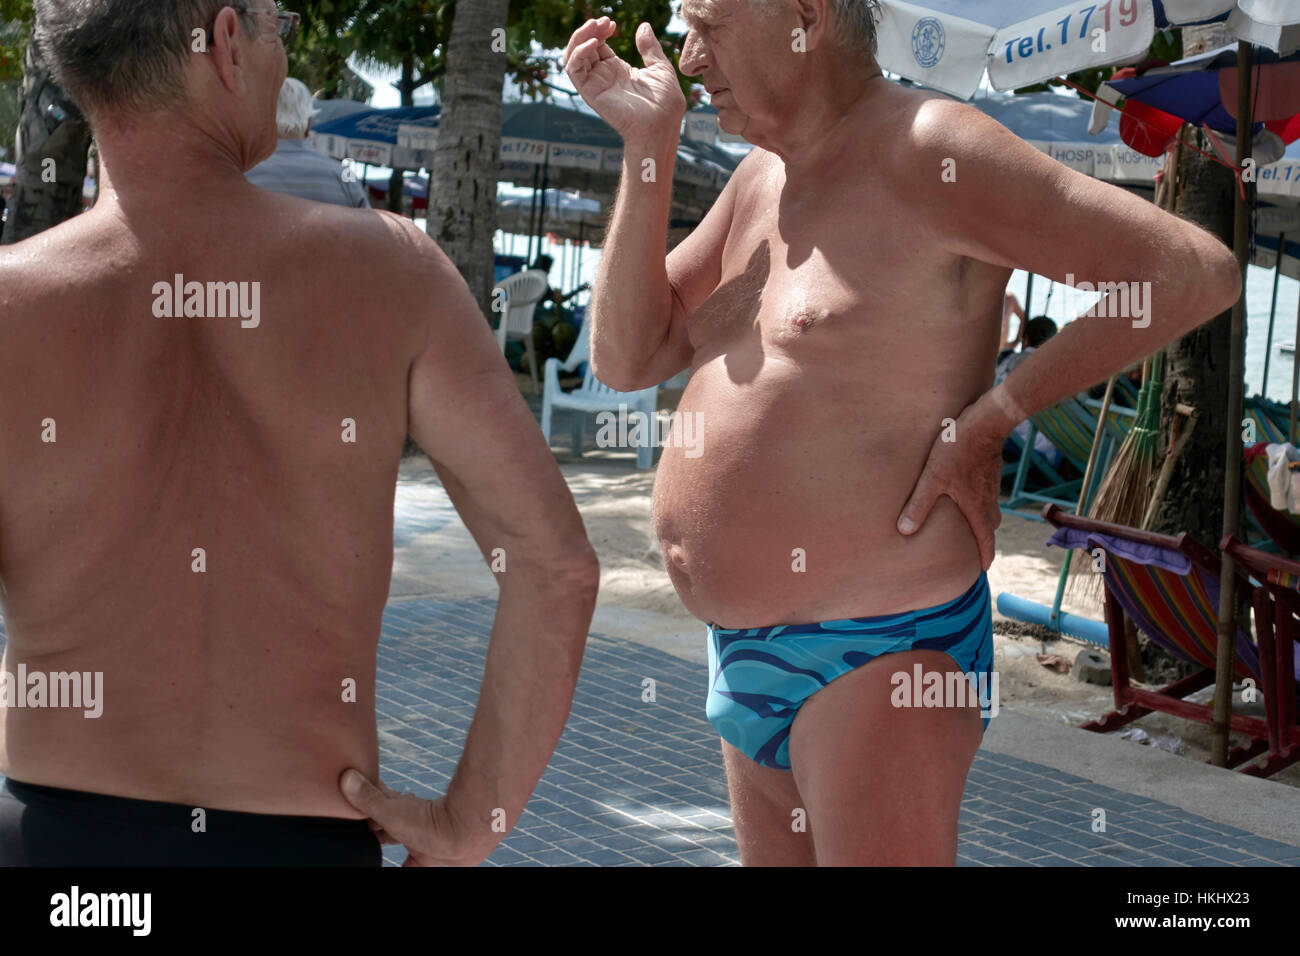 Two mature men with pronounced stomachs and wearing speedos swimming trunks  chatting on the street Stock Photo - Alamy